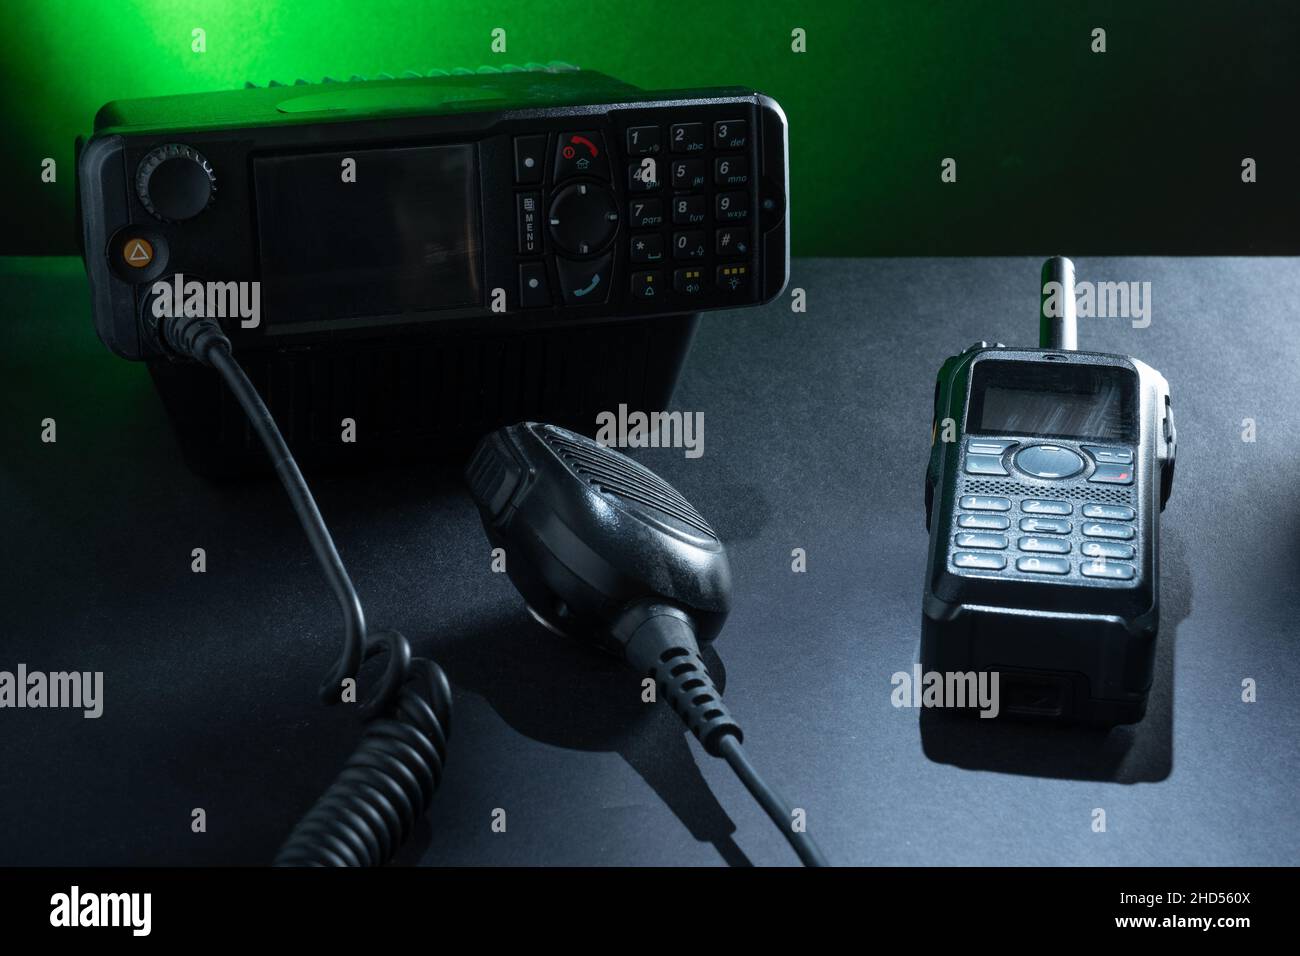 Helsinki / Finland - JANUARY 3, 2022: Closeup of pair of mobile two-way radios for Amateur radio operators against a dark background. Stock Photo